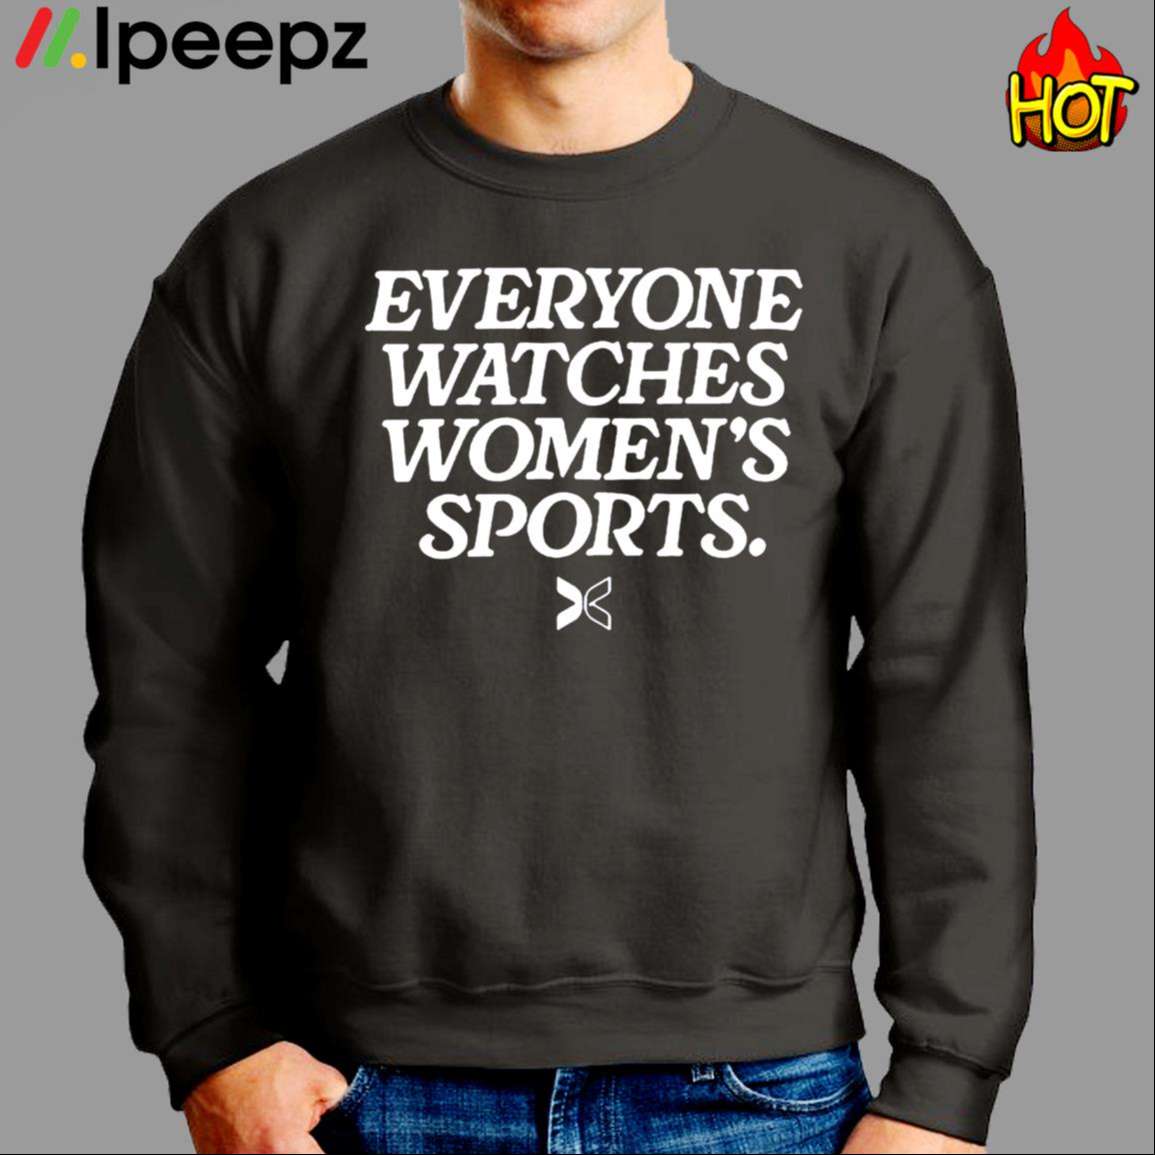 Everyone Watches Women’s Sports Tee